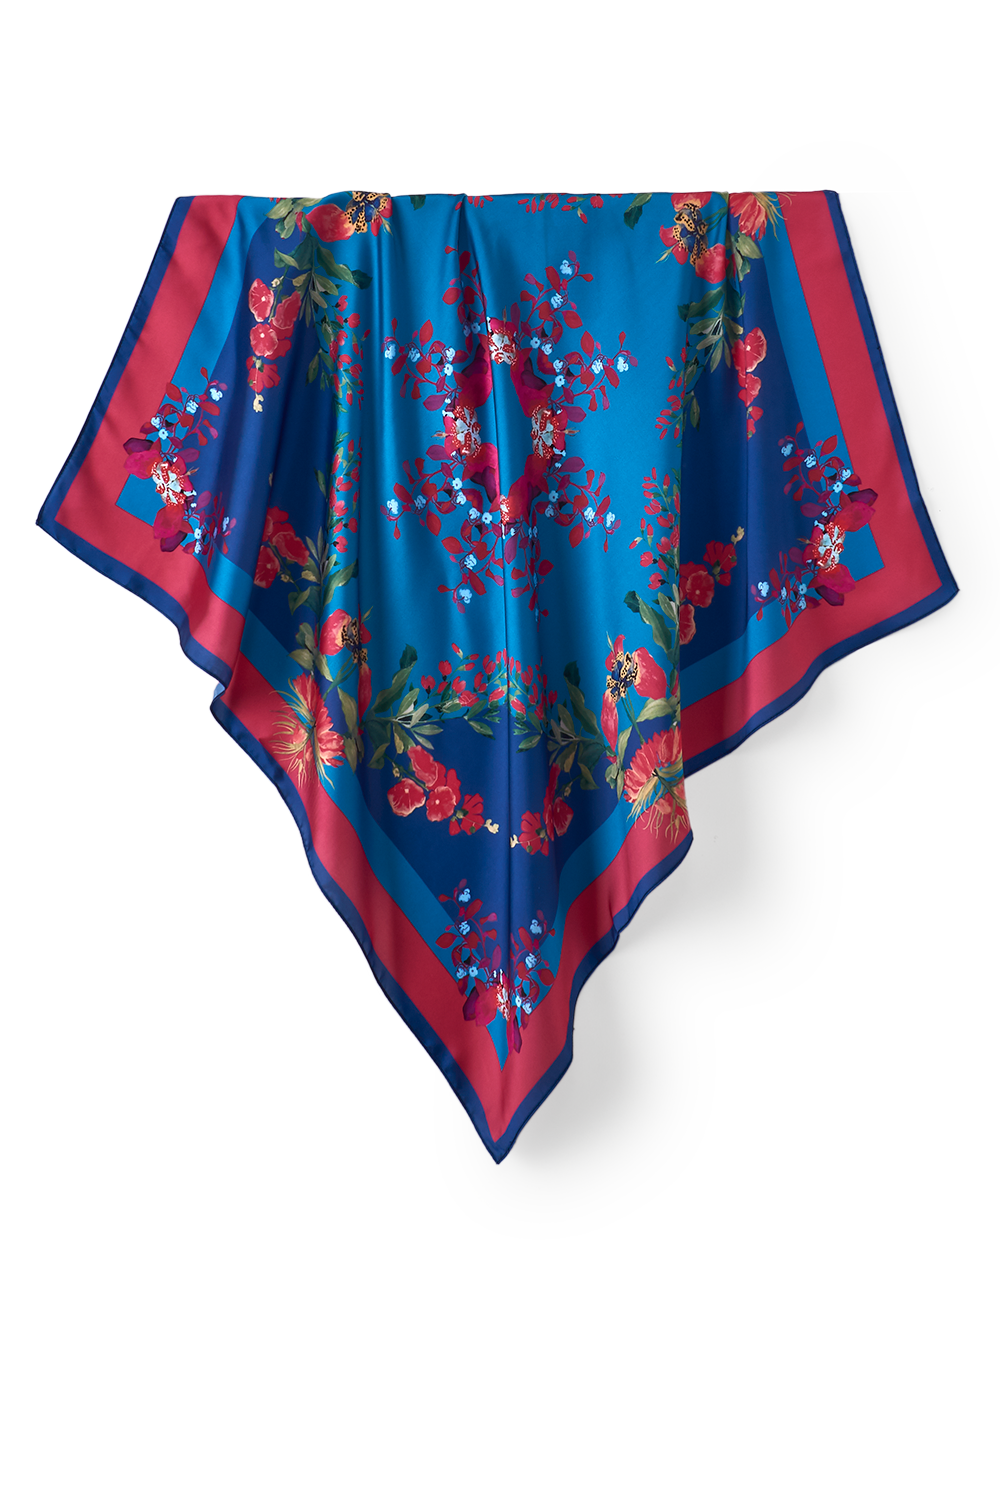 SCARF 70X70 FLORAL BLUE | SATIN POLYESTER 